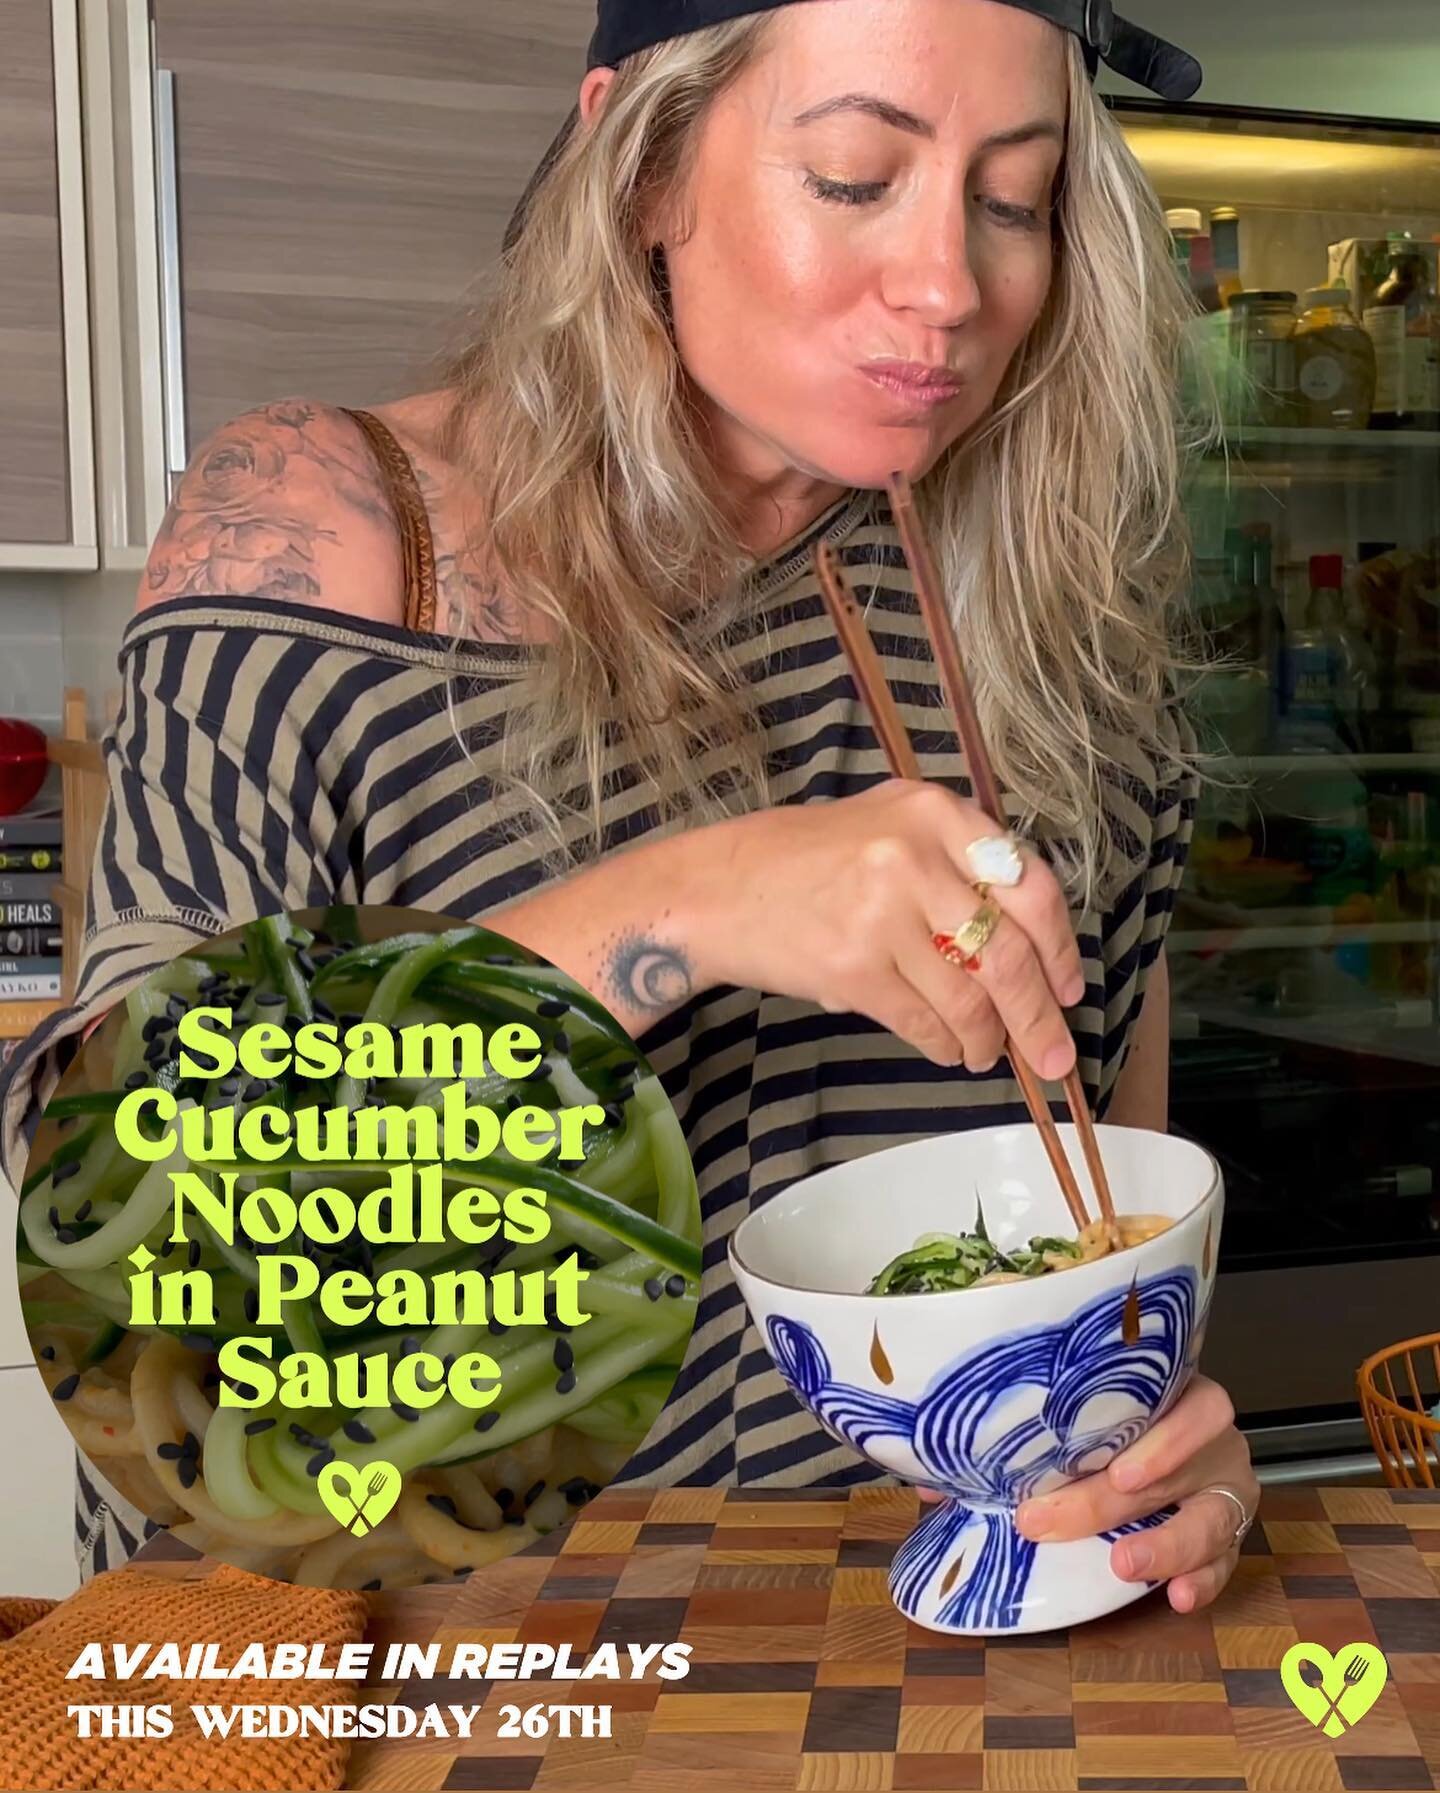 I call this my DNDWENF: Do Not Disturb While Eating Noodles Face. 🍜 
Can&rsquo;t wait to see yours this Wednesday when we launch Hungry Phoenix: Seasame Cucumber Noodles in Peanut Sauce! Register now to snag the recipe and video launches Wednesday i